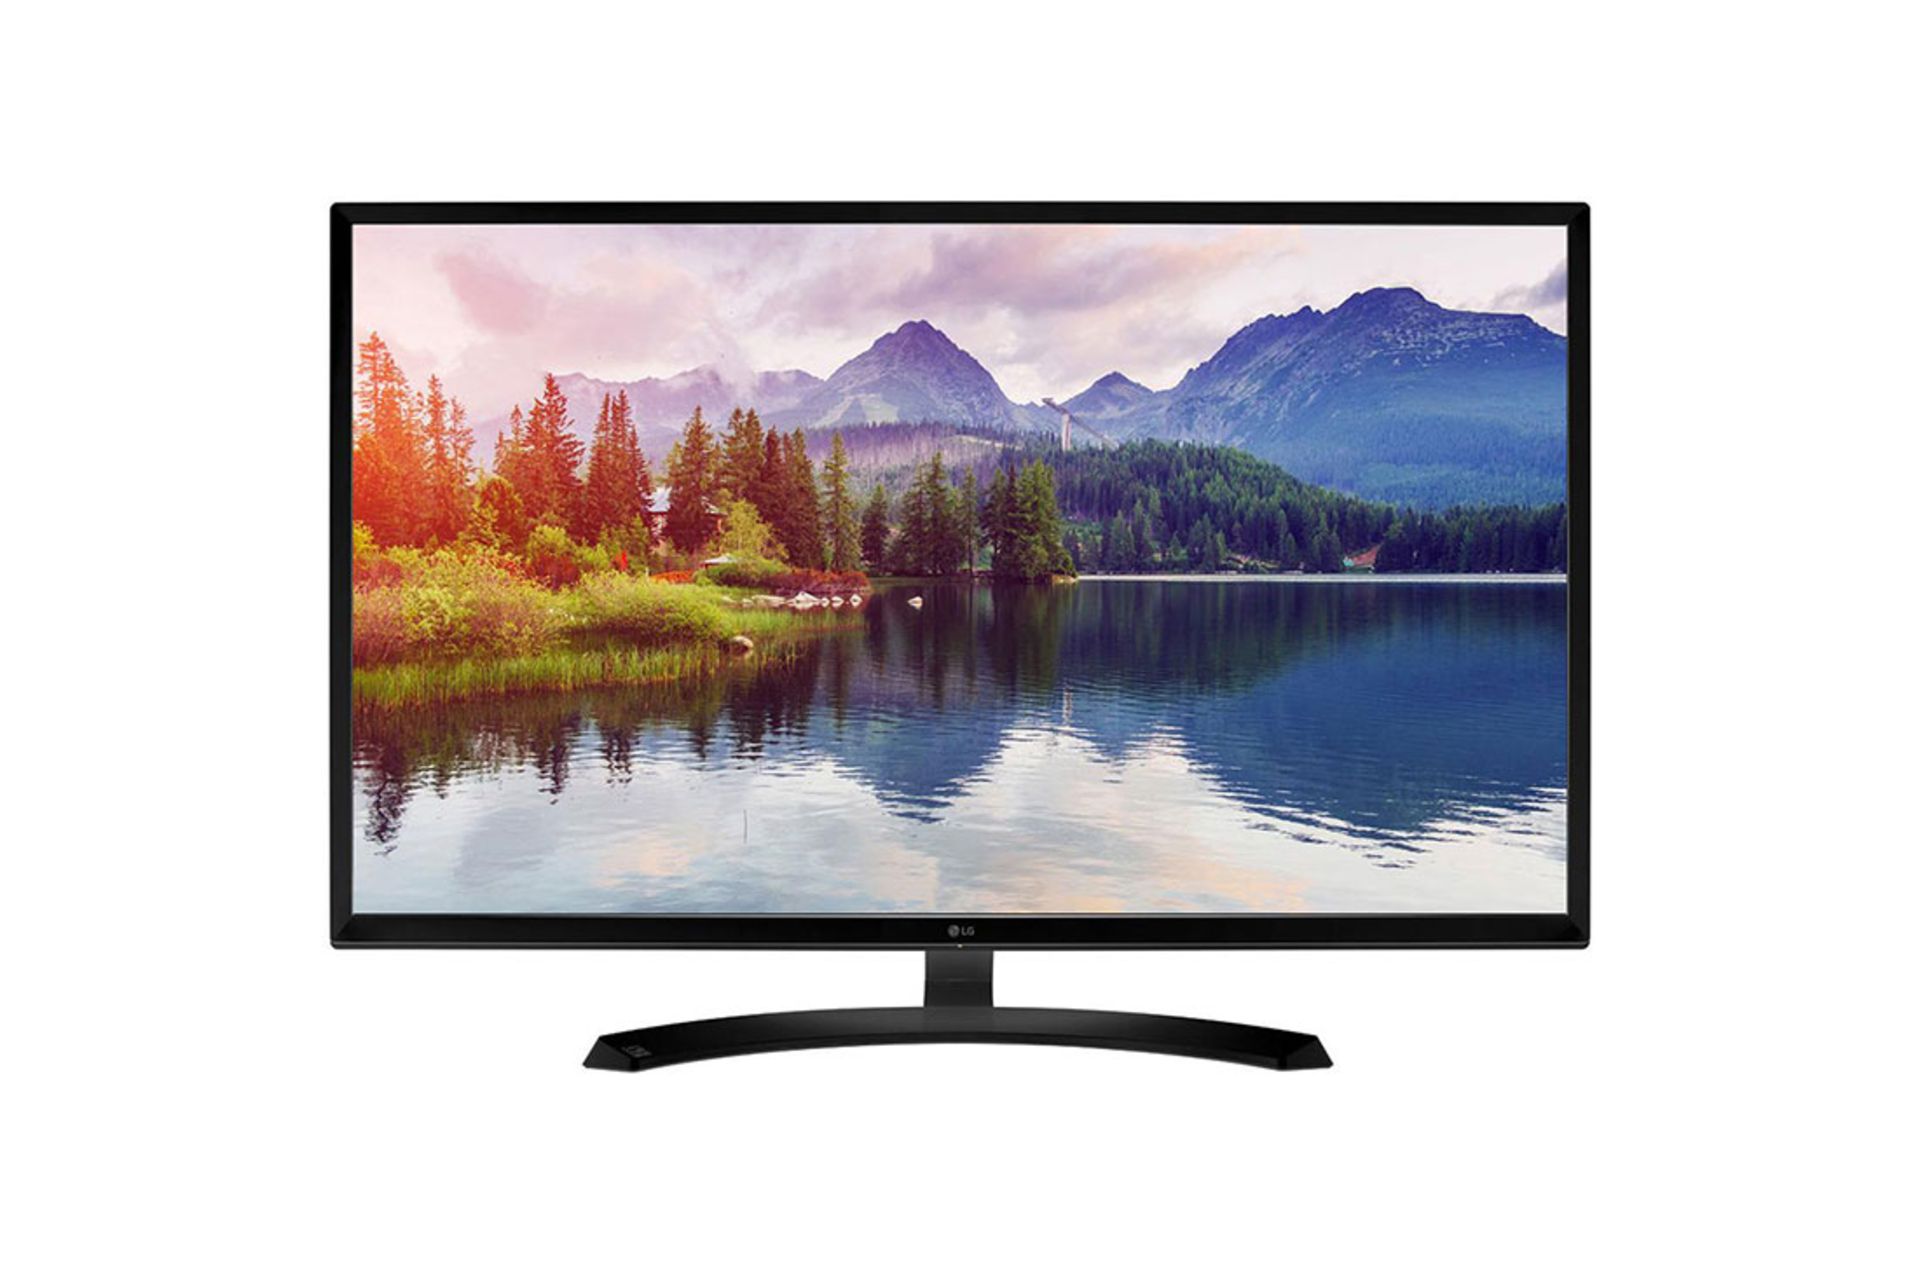 V Grade A LG 32 Inch FULL HD LED MONITOR WITH SPEAKERS 32MP58HQ-P